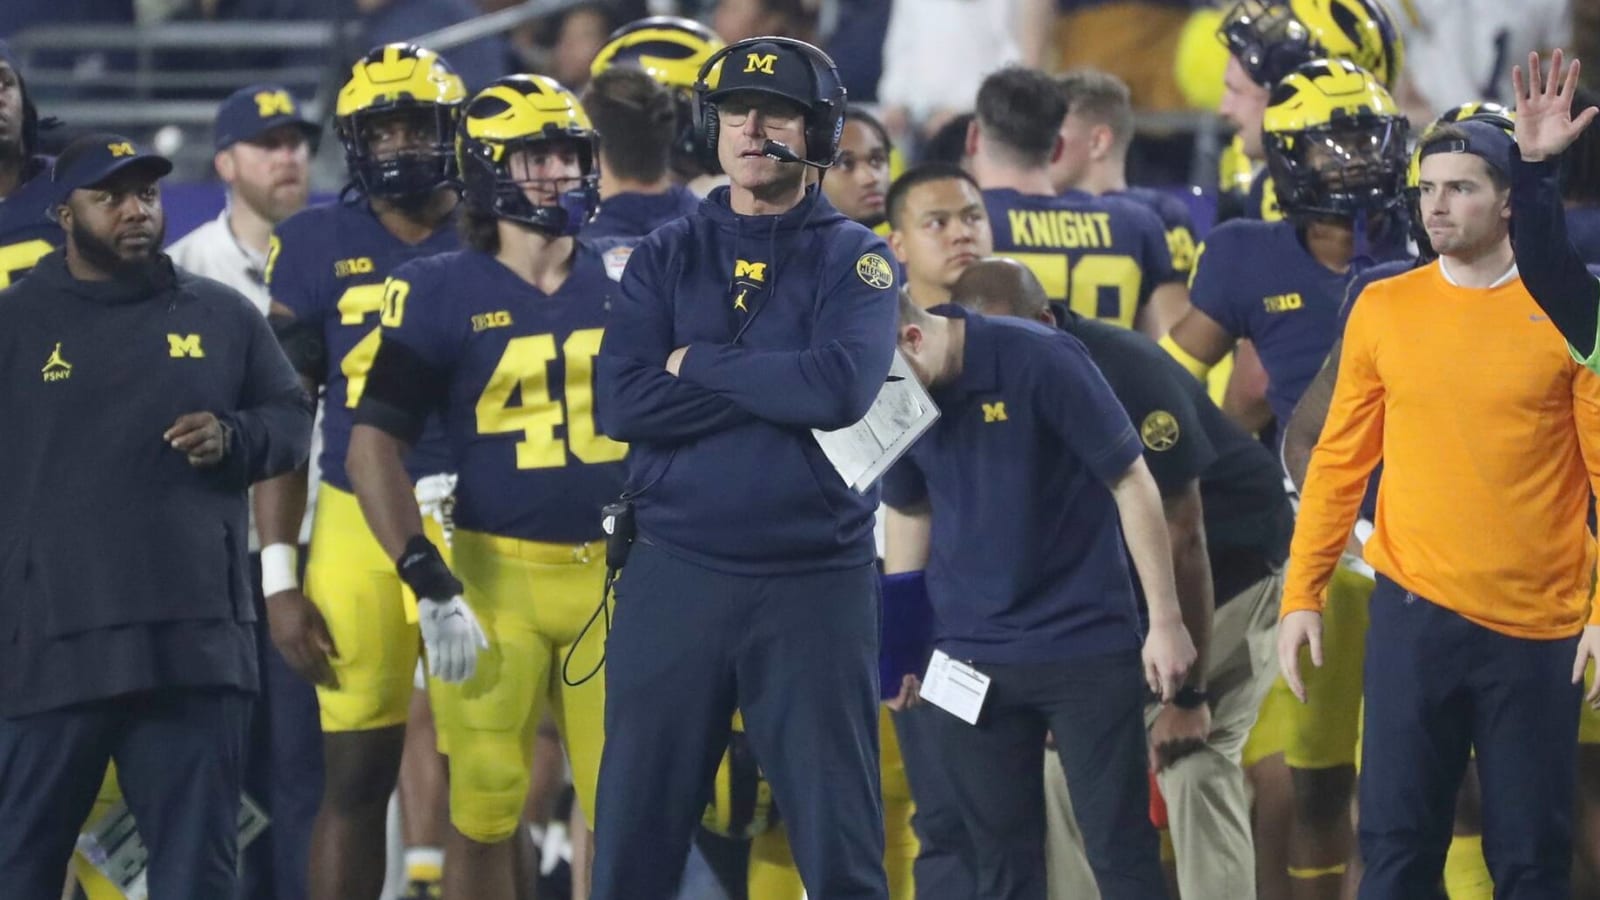 Odds show potential NFL future for Jim Harbaugh